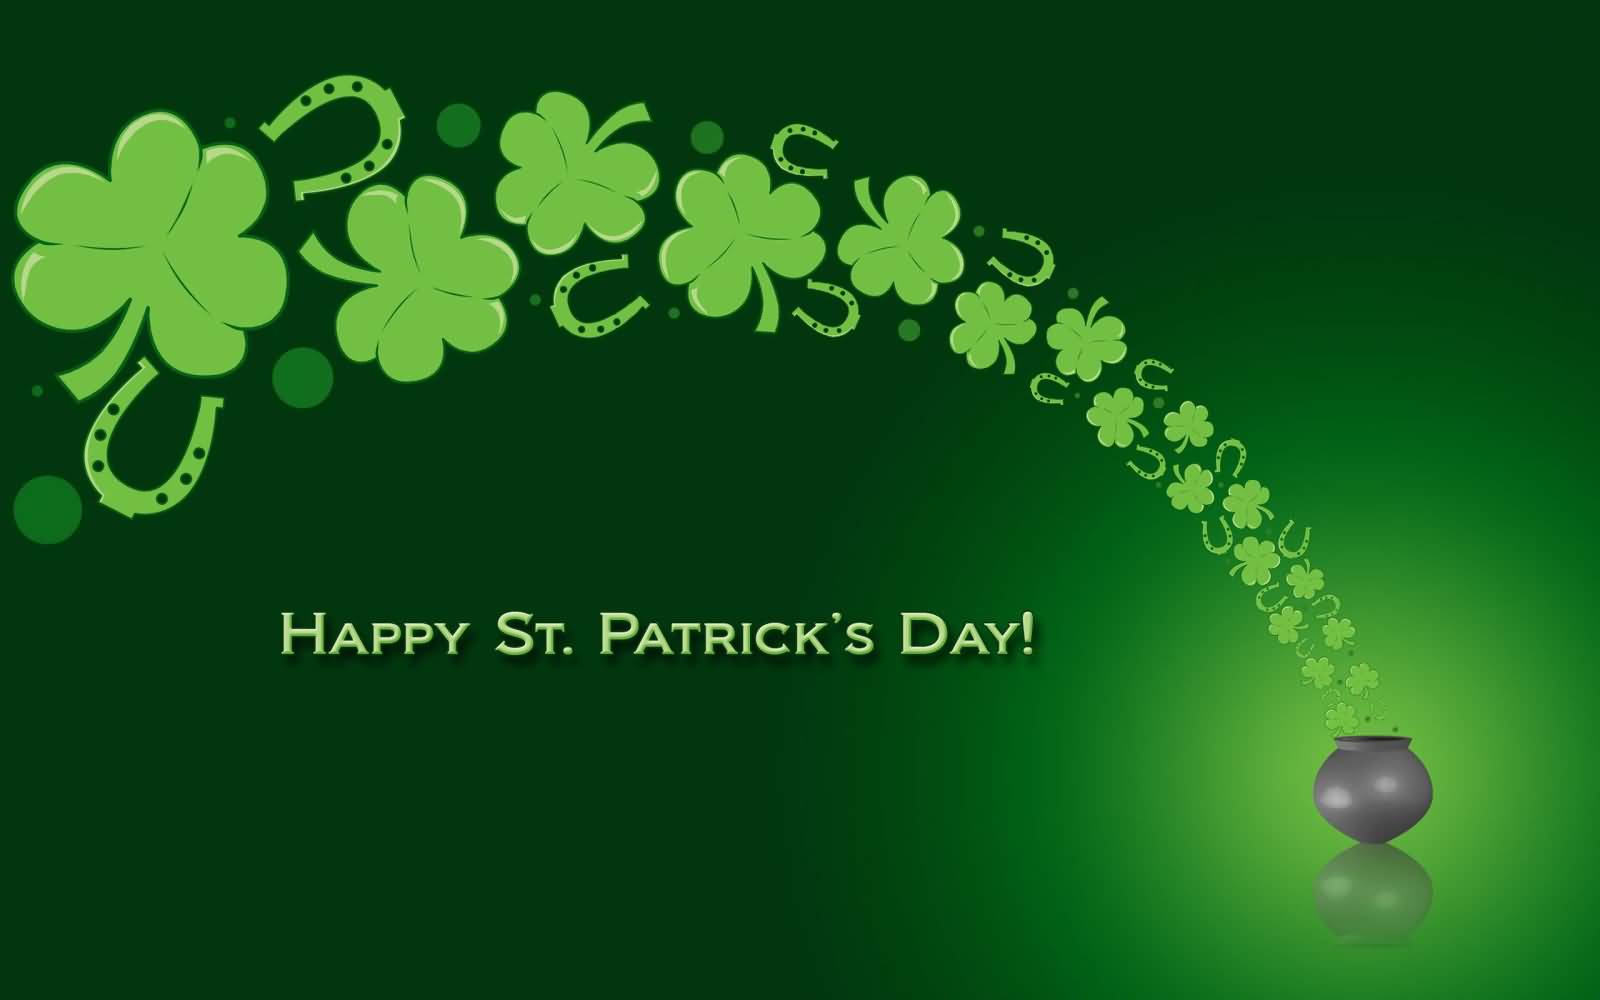 Happy Saint Patrick’s Day Clover Leafs In Pot Wallpaper